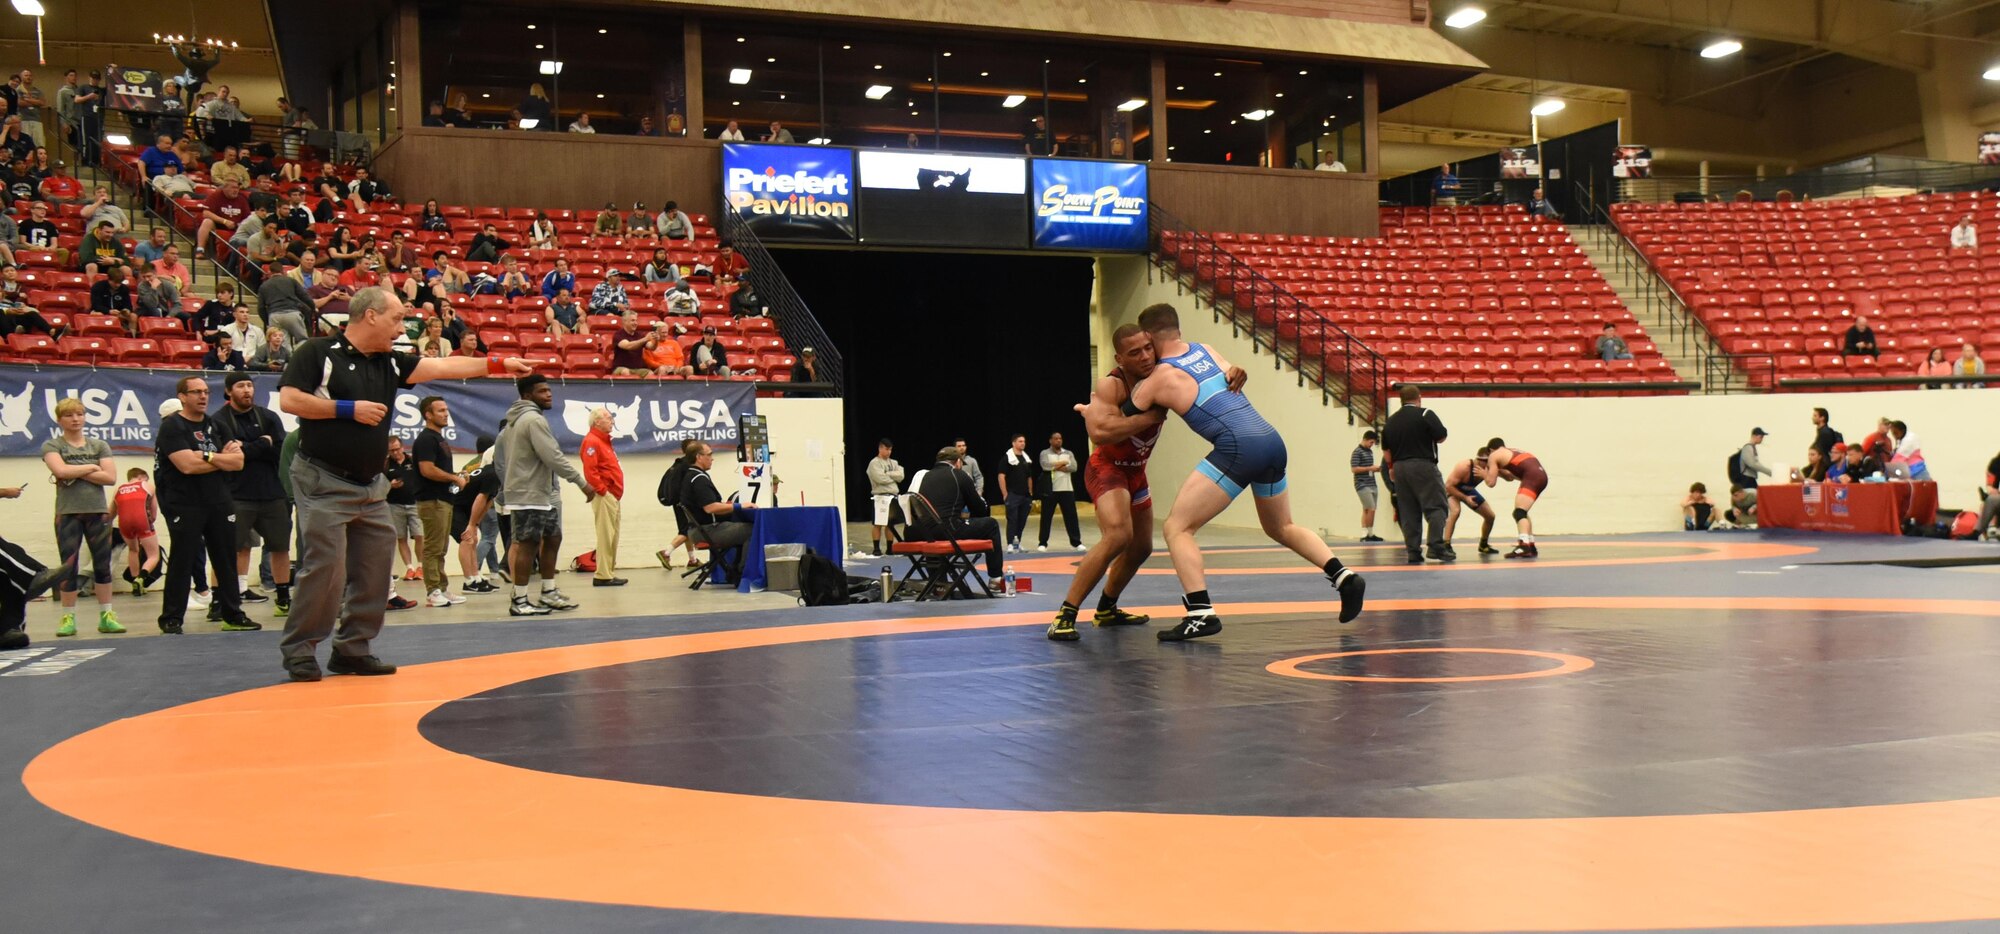 Sherwin Severin, Air Force Wrestling team member, fights for control over his opponent during the Senior Greco-Roman World team trials in Las Vegas, Nev., April 29, 2017. Severin has wrestled on the Air Force team for eight years. He is stationed at F.E. Warren Air Force Base, Wyo. (U.S. Air Force photo by Airman 1st Class Breanna Carter)